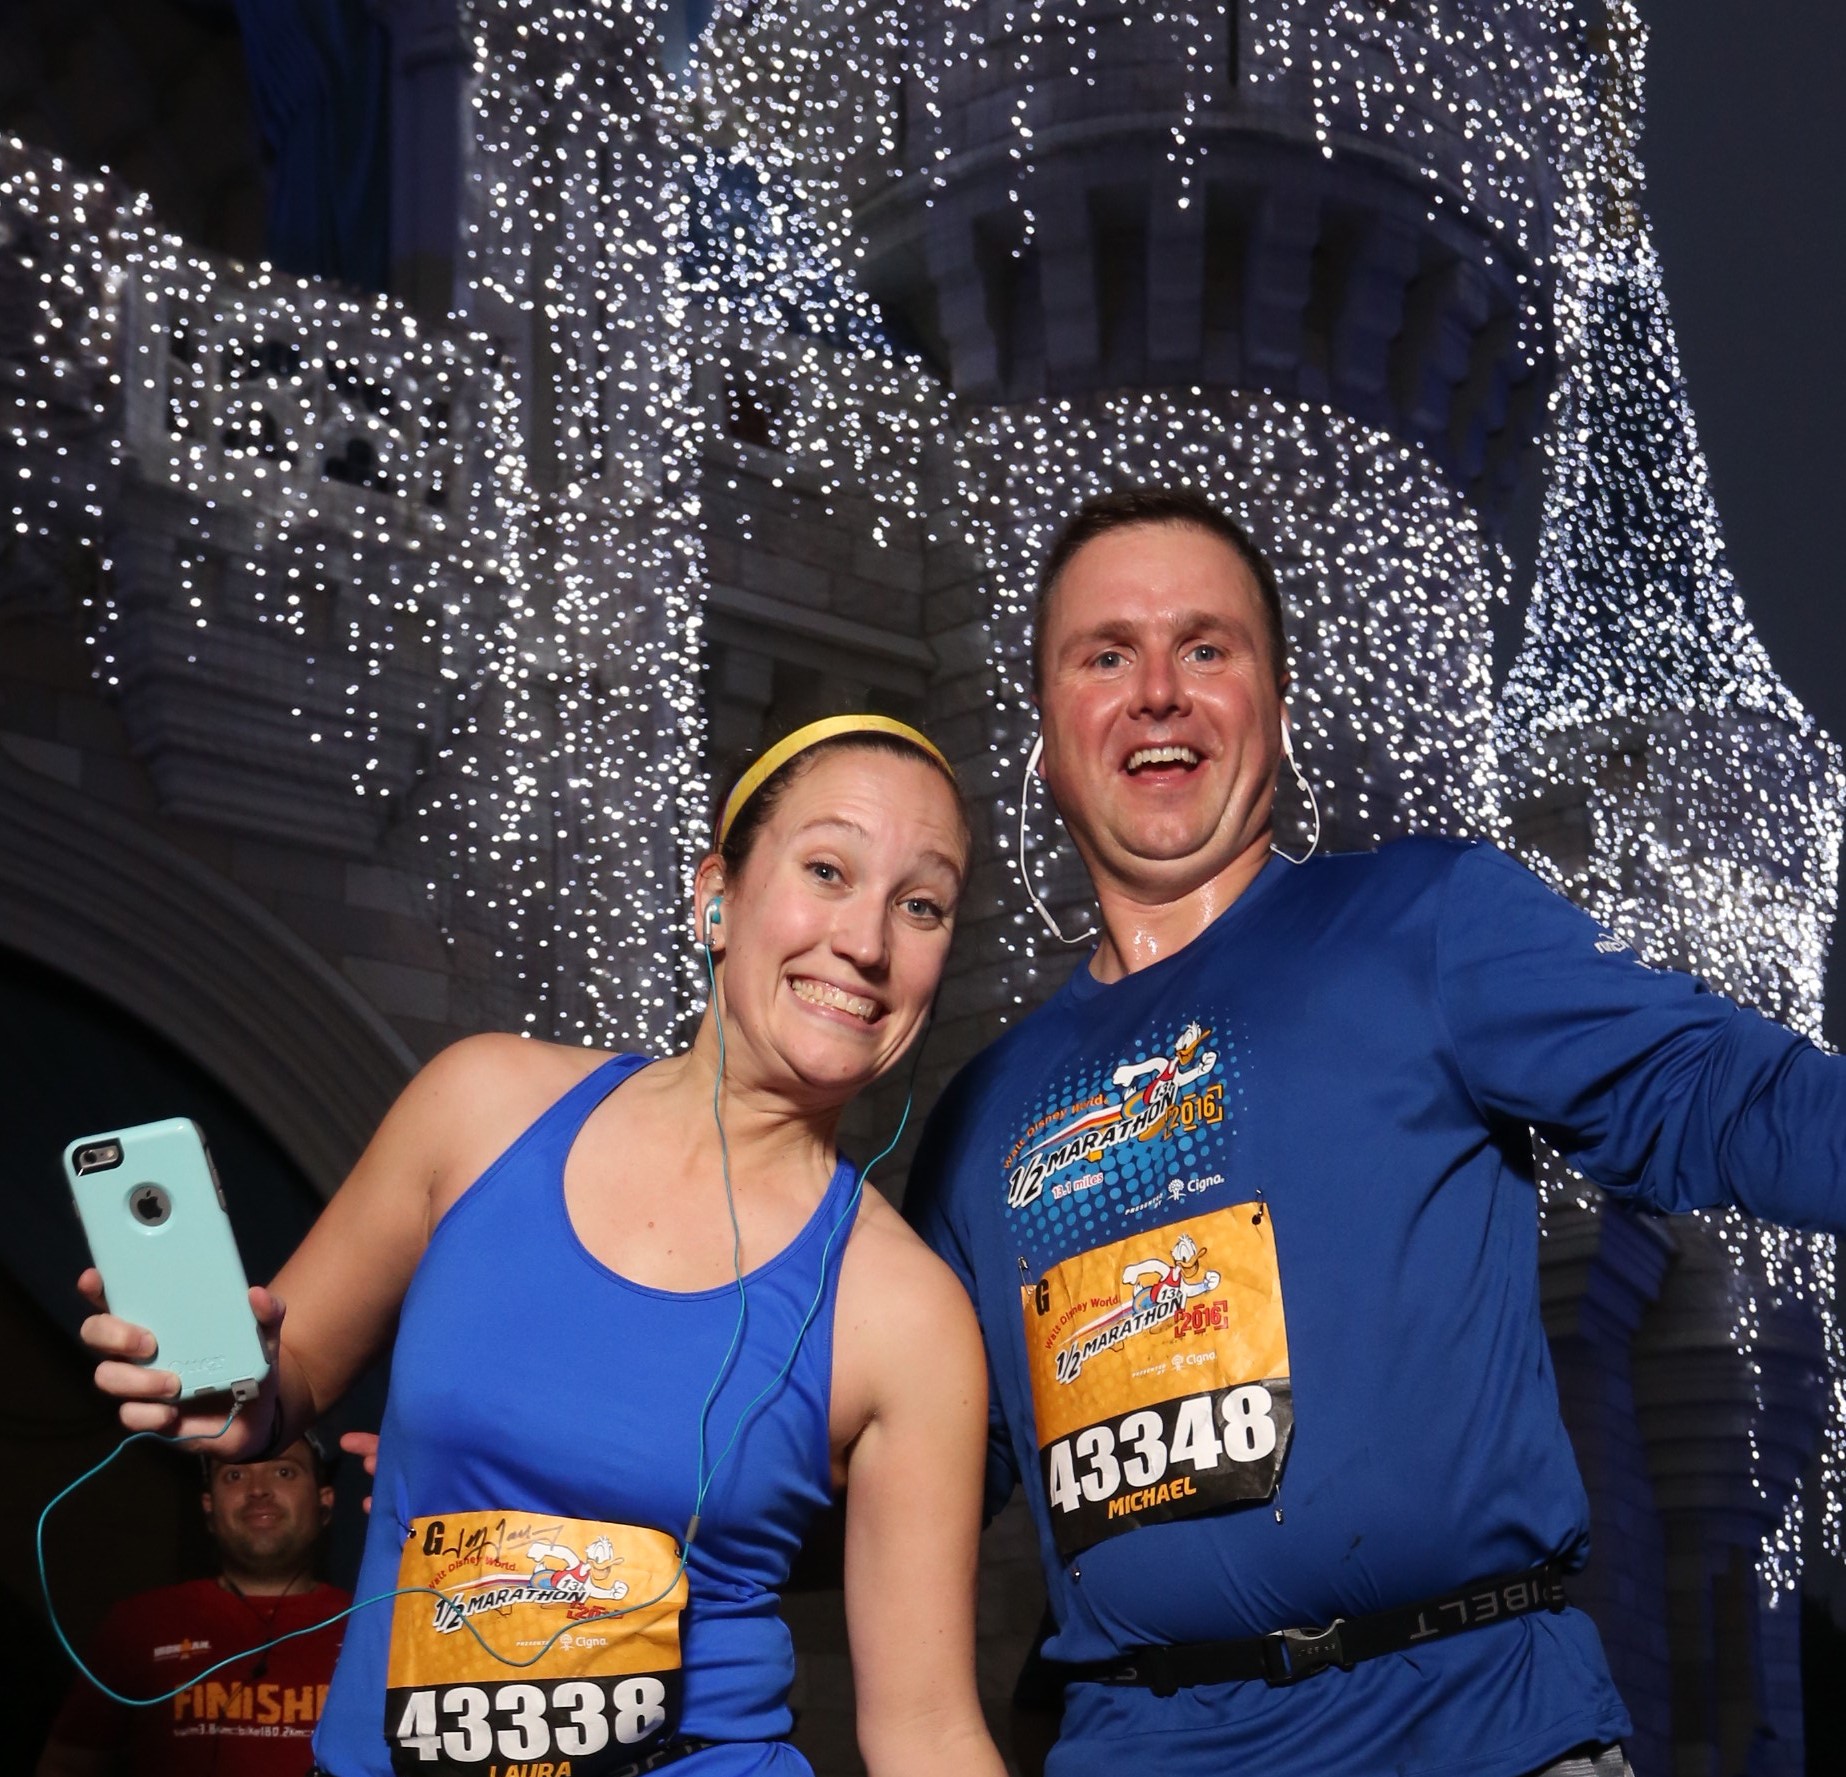 PhotoPass Joins Forces with RunDisney